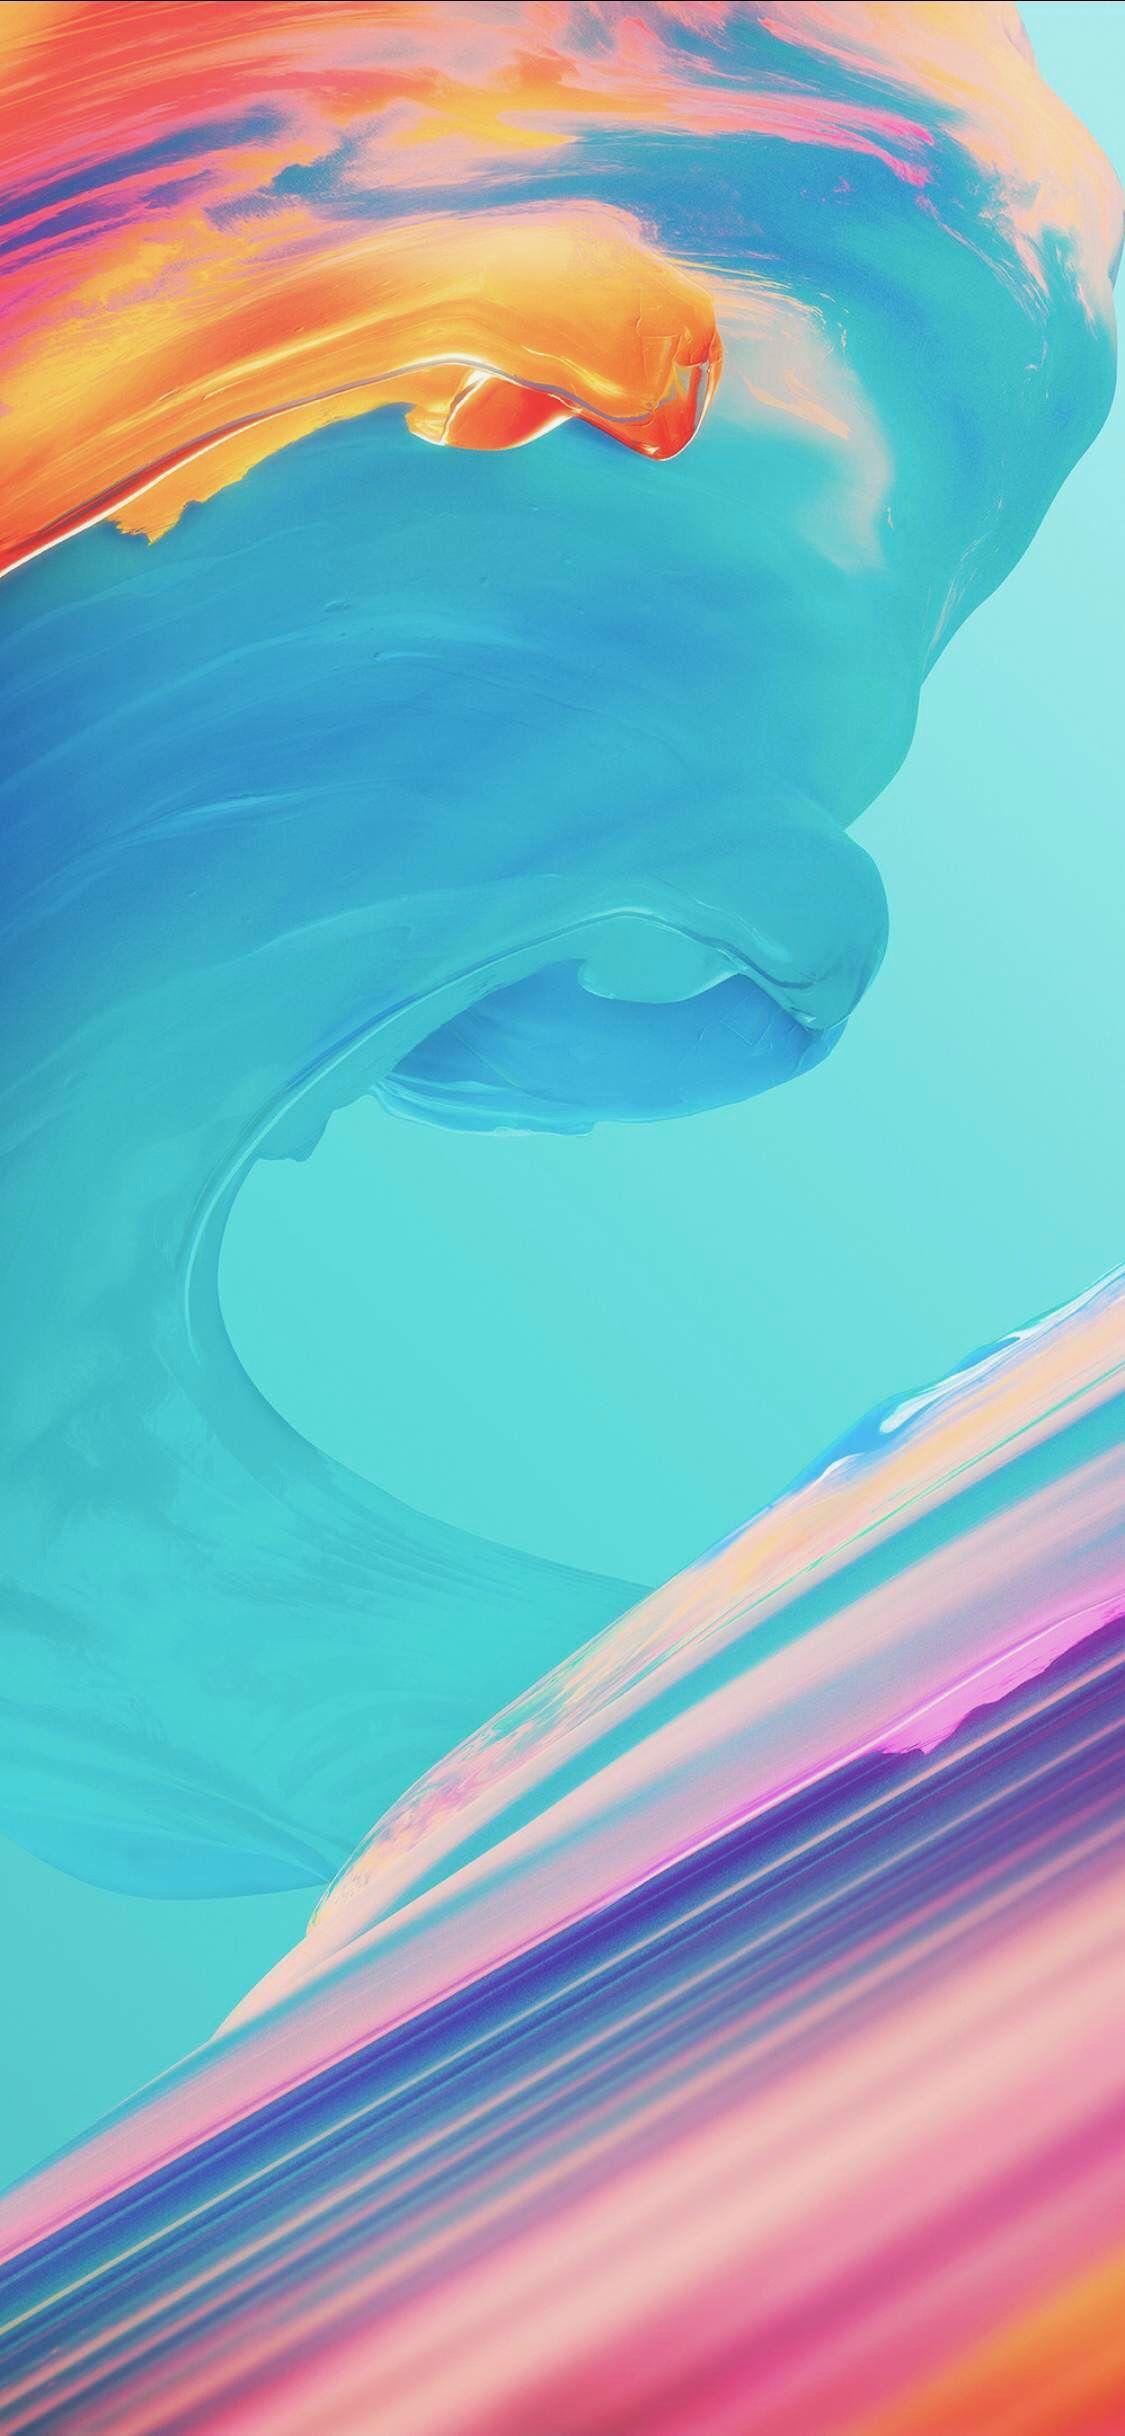 iOS 11, iPhone X, blue, Red, purple, abstract, apple, wallpapers